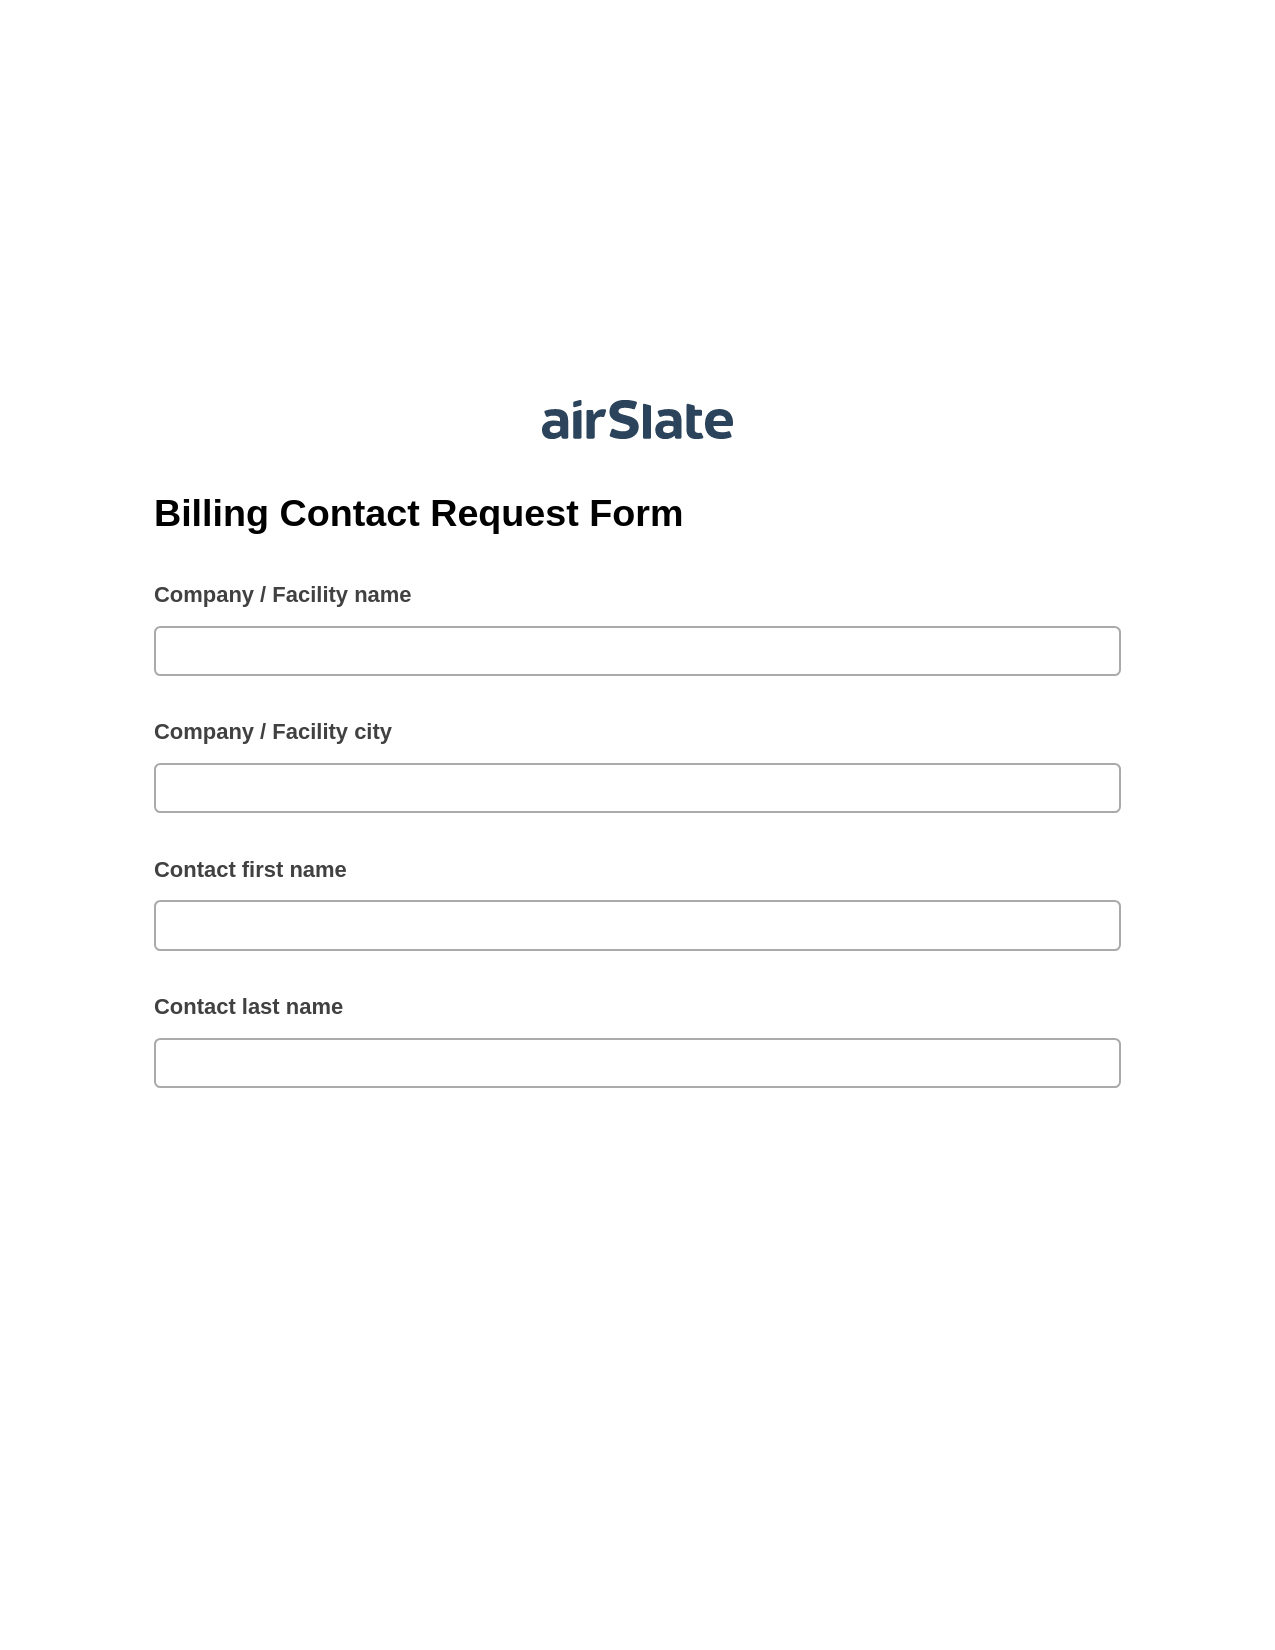 Billing Contact Request Form Pre-fill Slate from MS Dynamics 365 Records Bot, Assign Slate Name Bot, Export to Excel 365 Bot